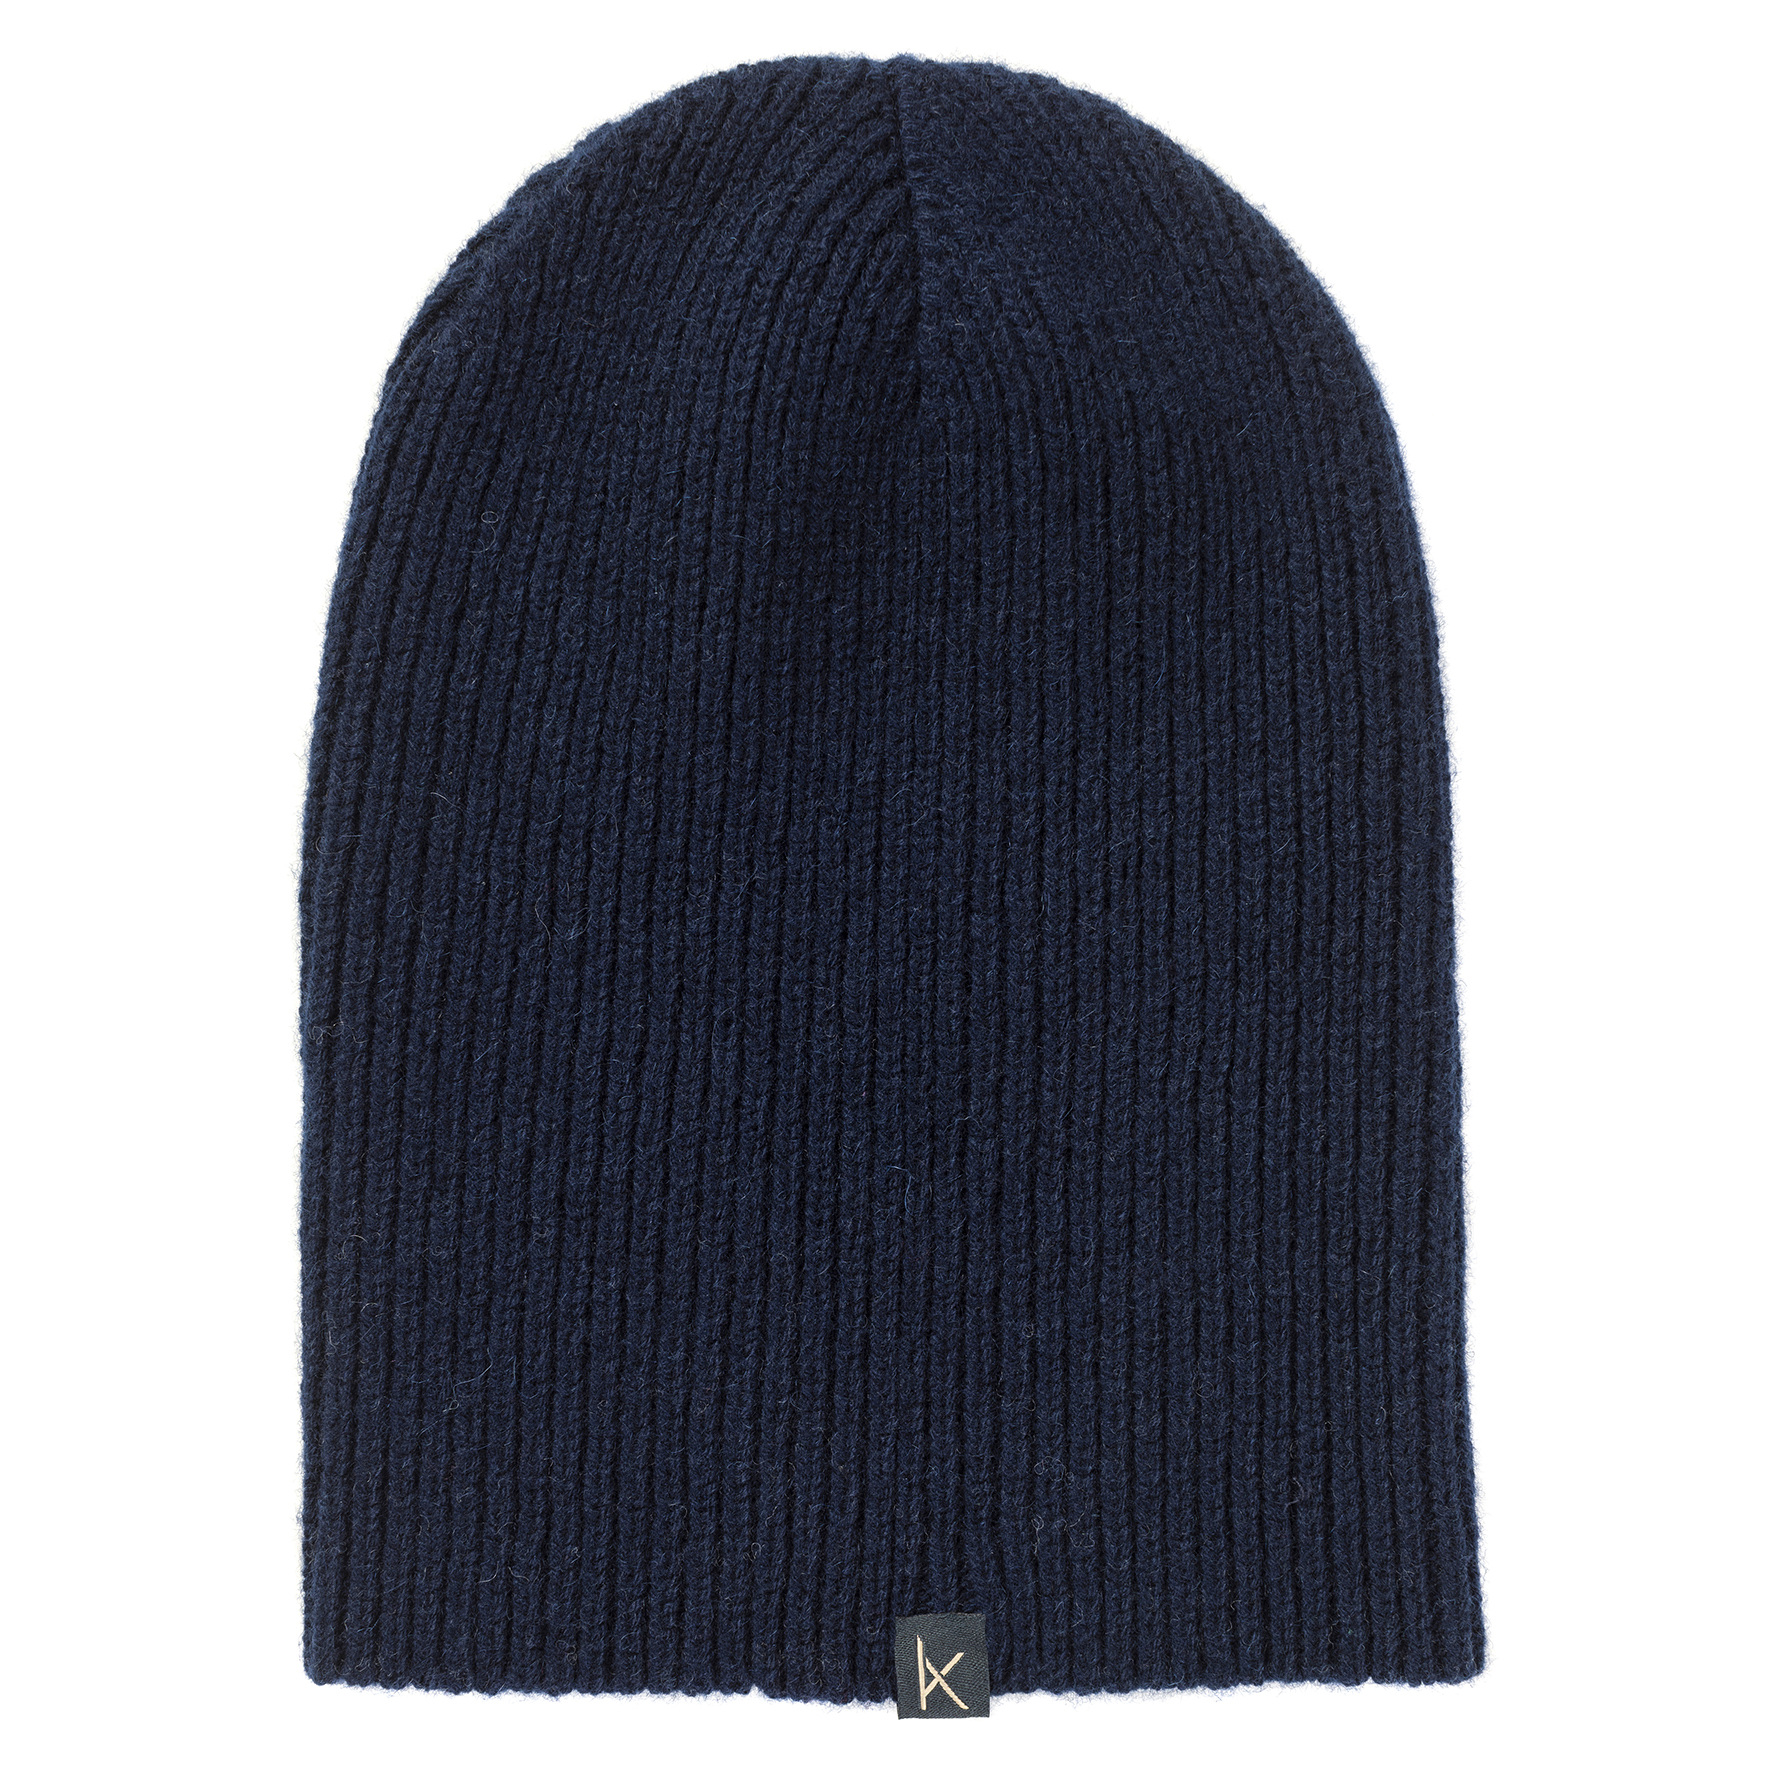 Navy Deluxe Knitted Cashmere Beanie Hat